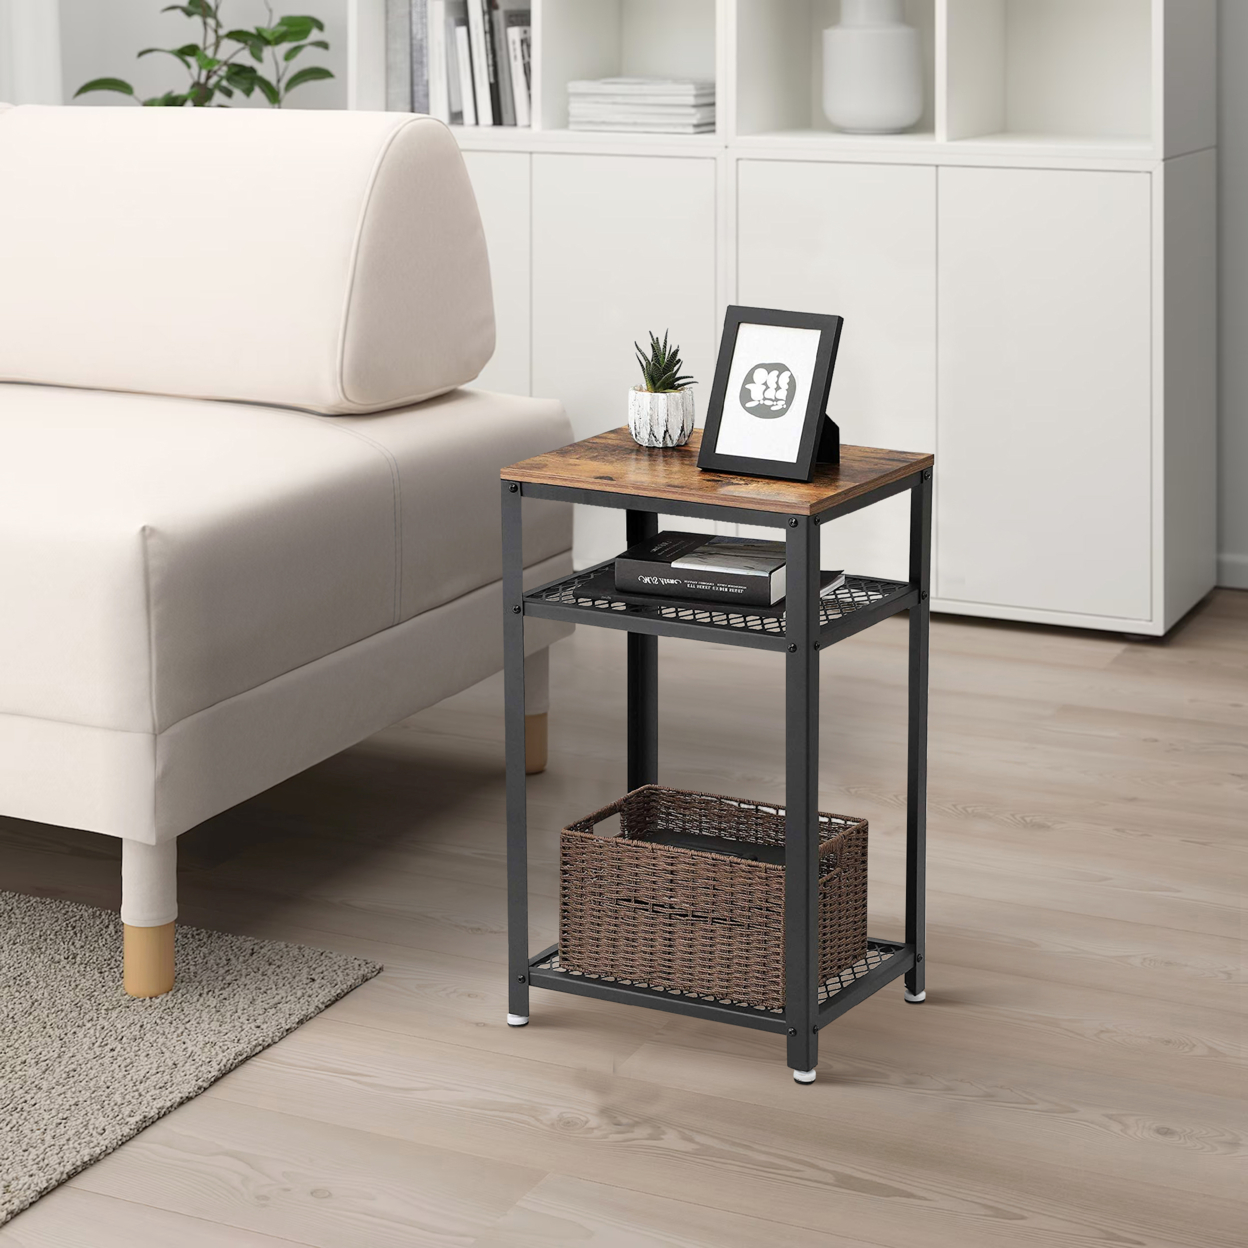 Industrial Style Iron And Wood Side Table With Two Tier Mesh Shelves, Black And Brown- Saltoro Sherpi